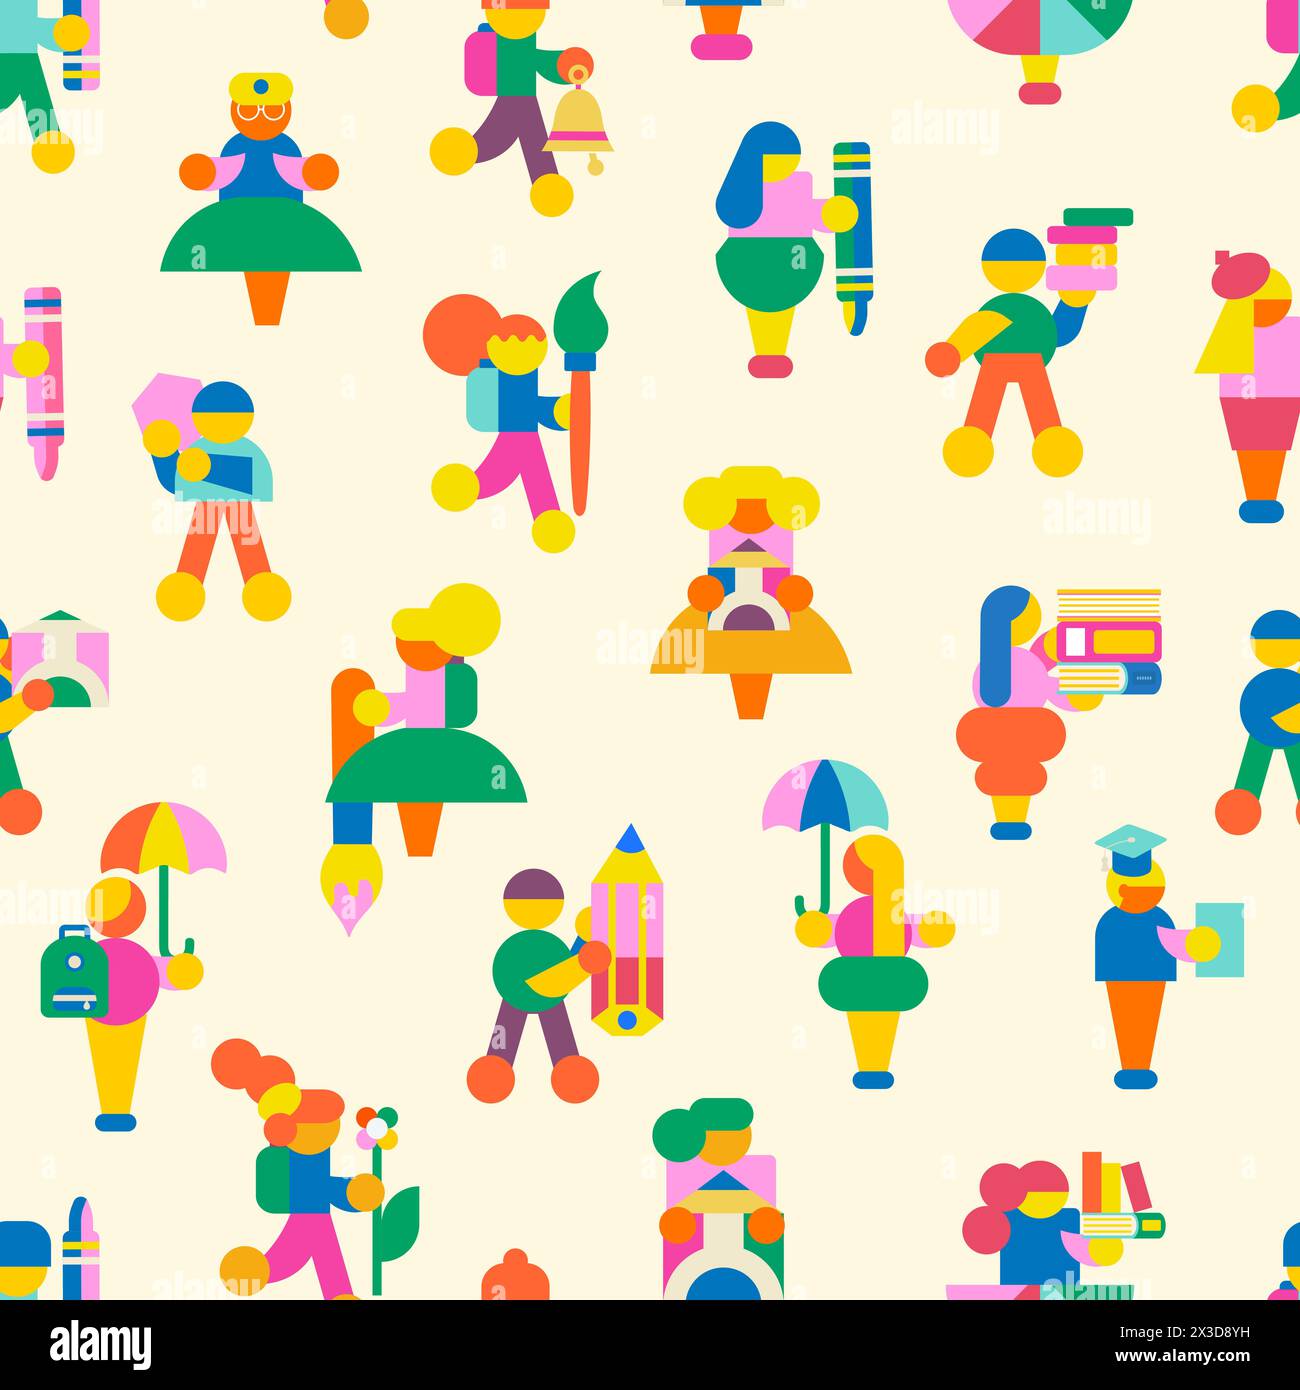 Children seamless pattern. Modern minimalistic design of crowd of people with school supplies or drawing supplies. Stock Vector